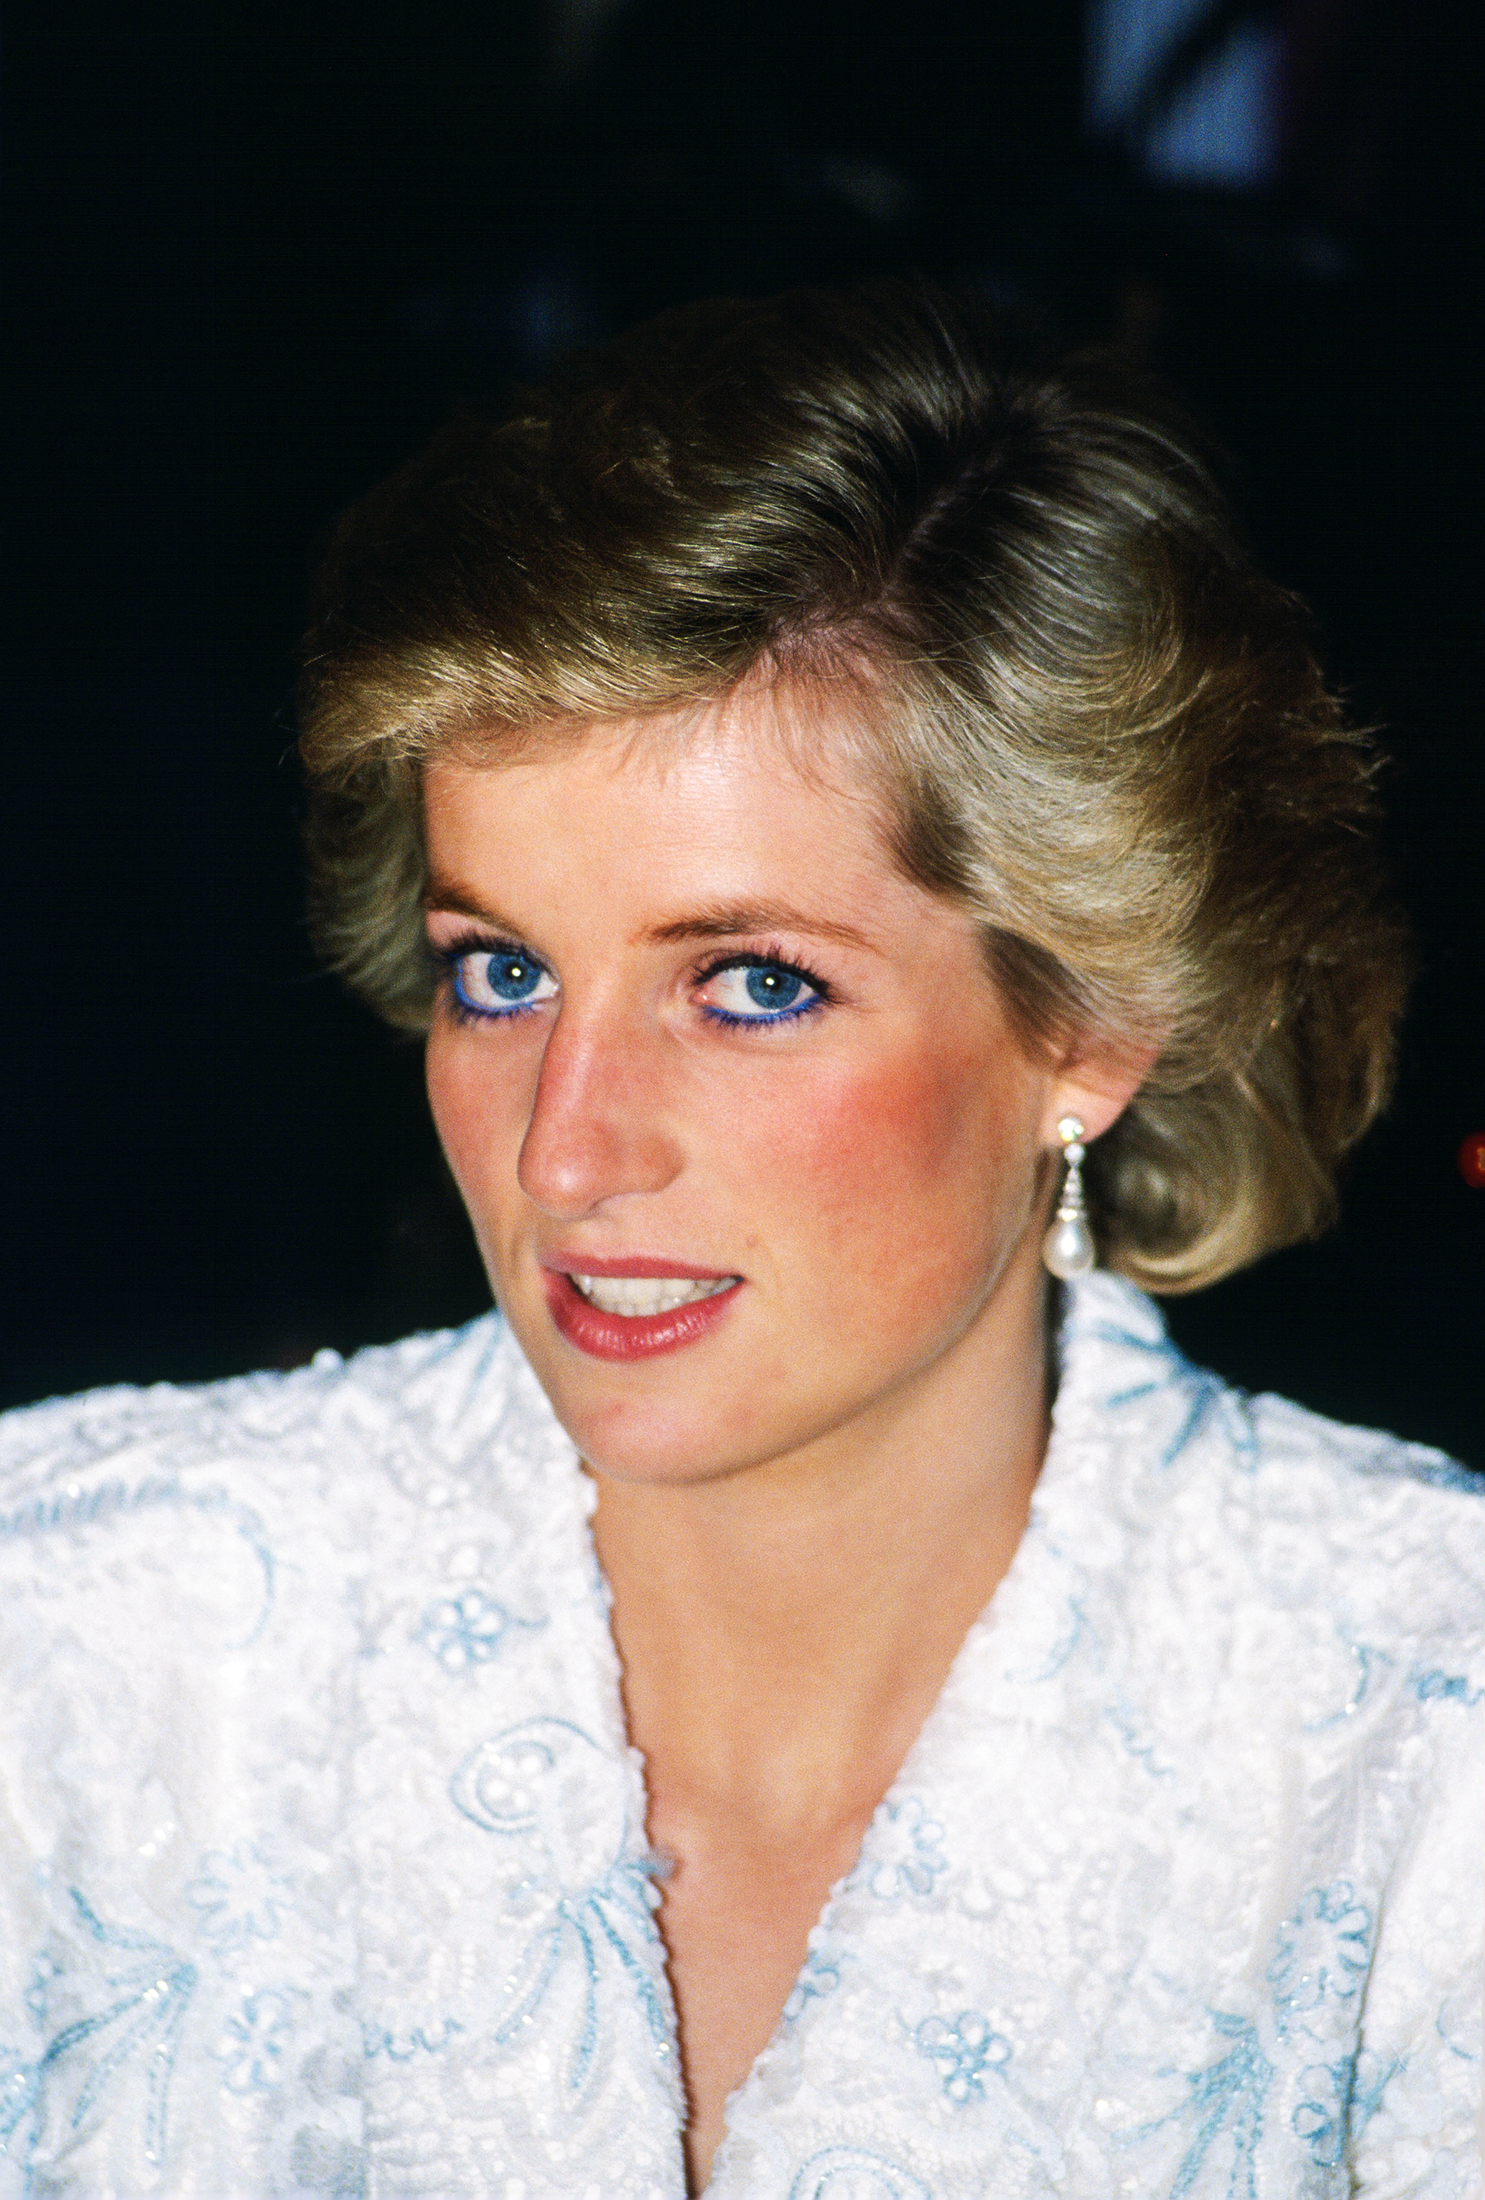 16 Princess Diana Fashion Trends That Are Back For 2022